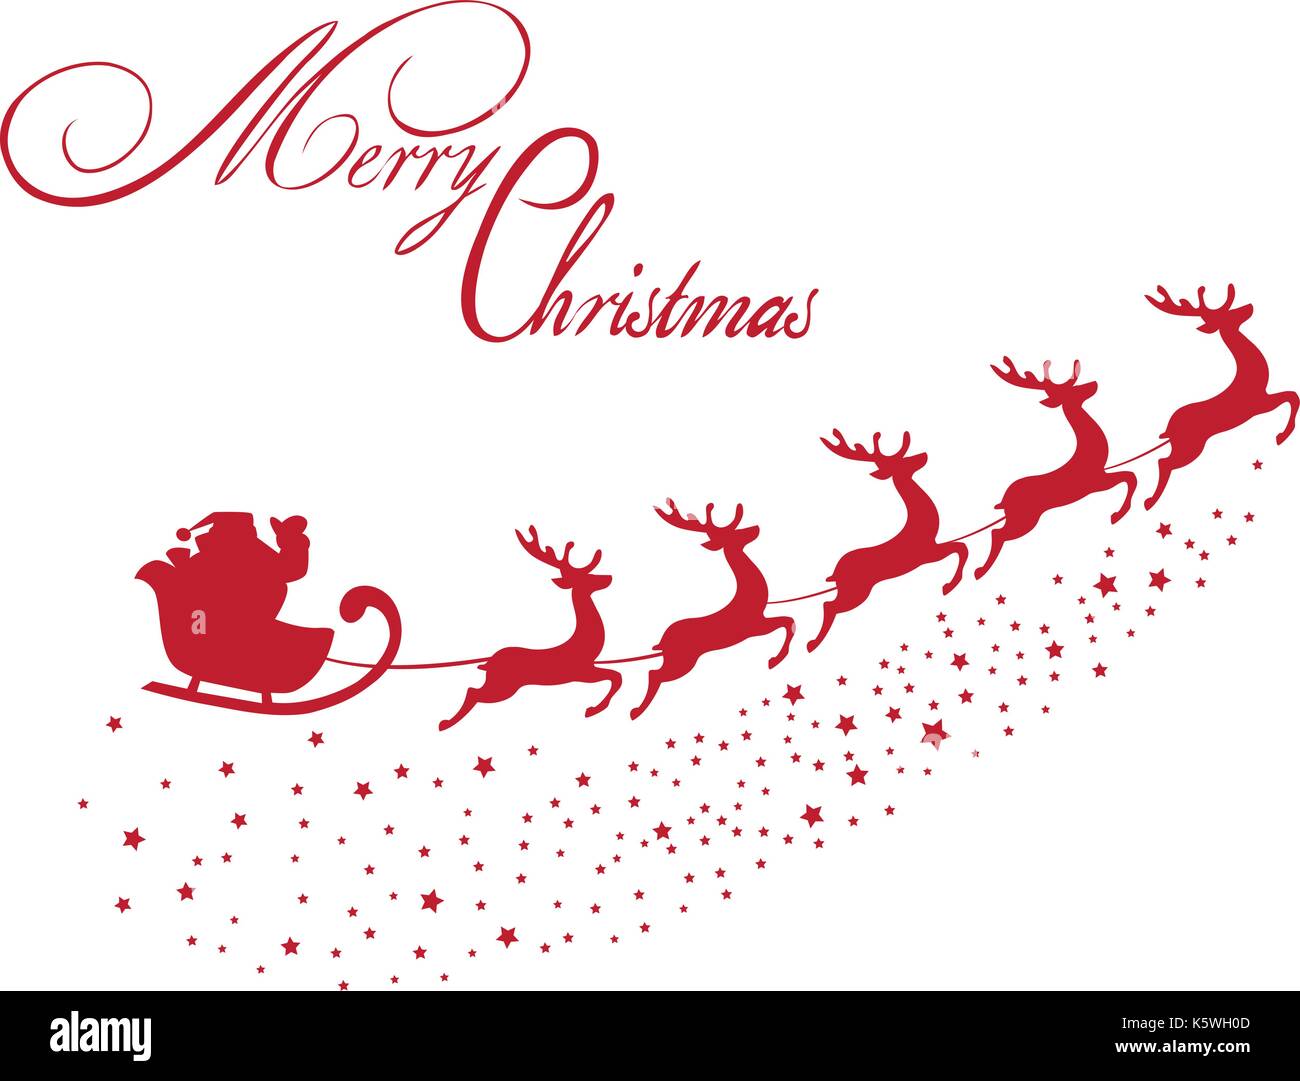 vector illustration of Santa Claus flying with reindeer Christmas background. Stock Vector